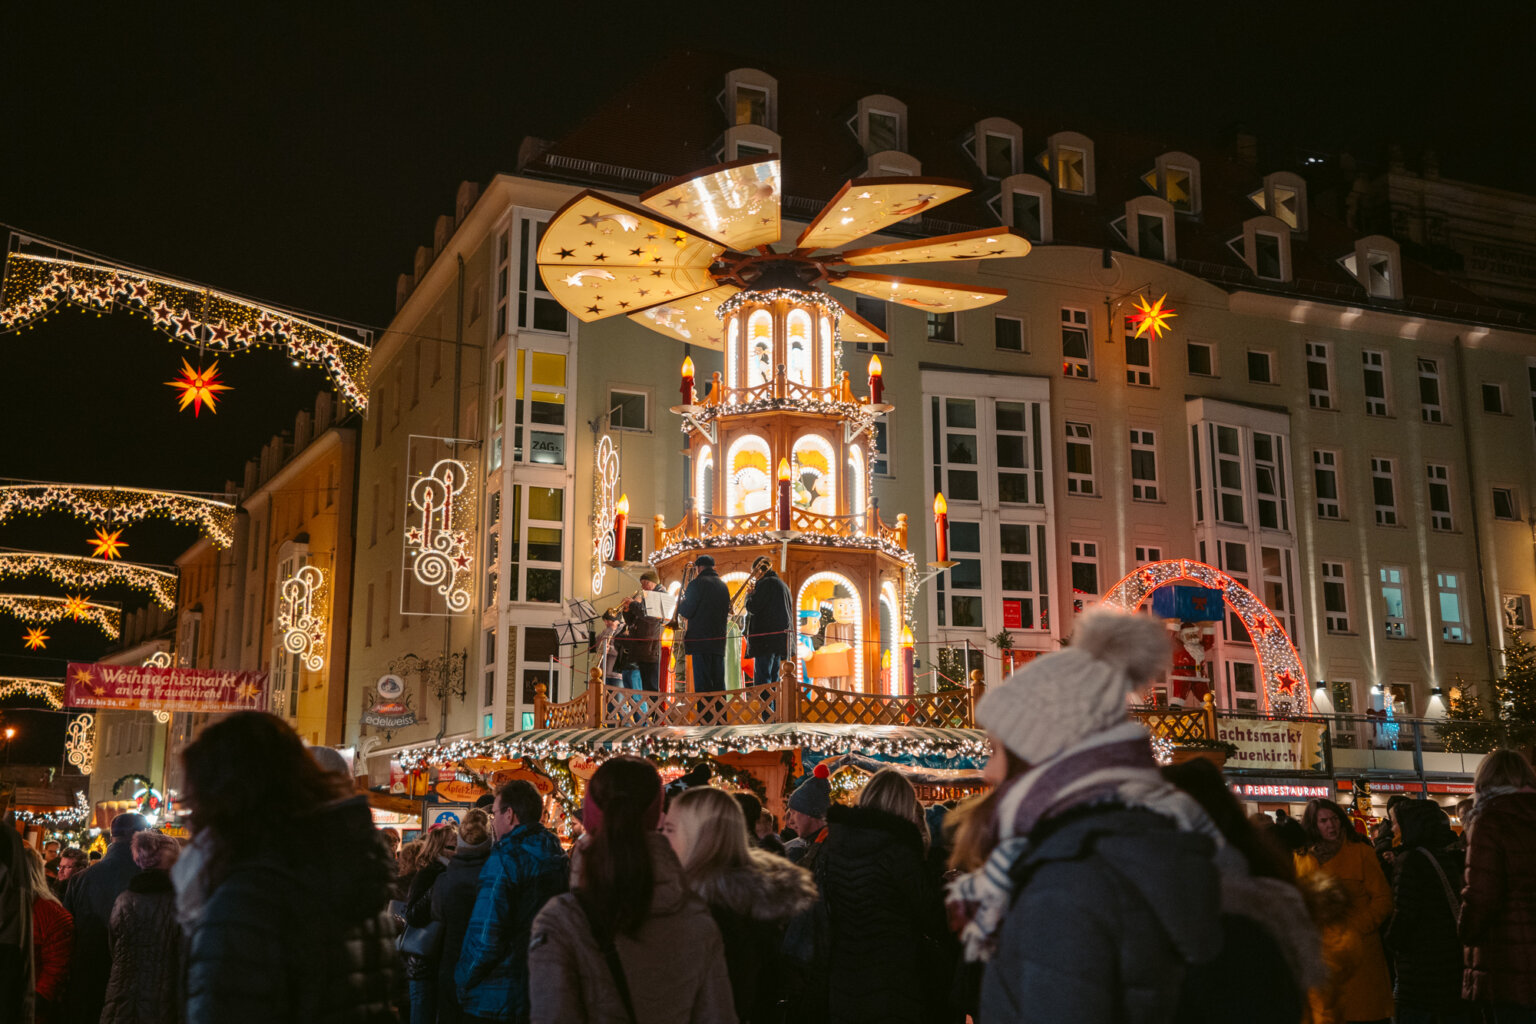 Dresden Christmas Markets 2022 Dates, Hotels & More